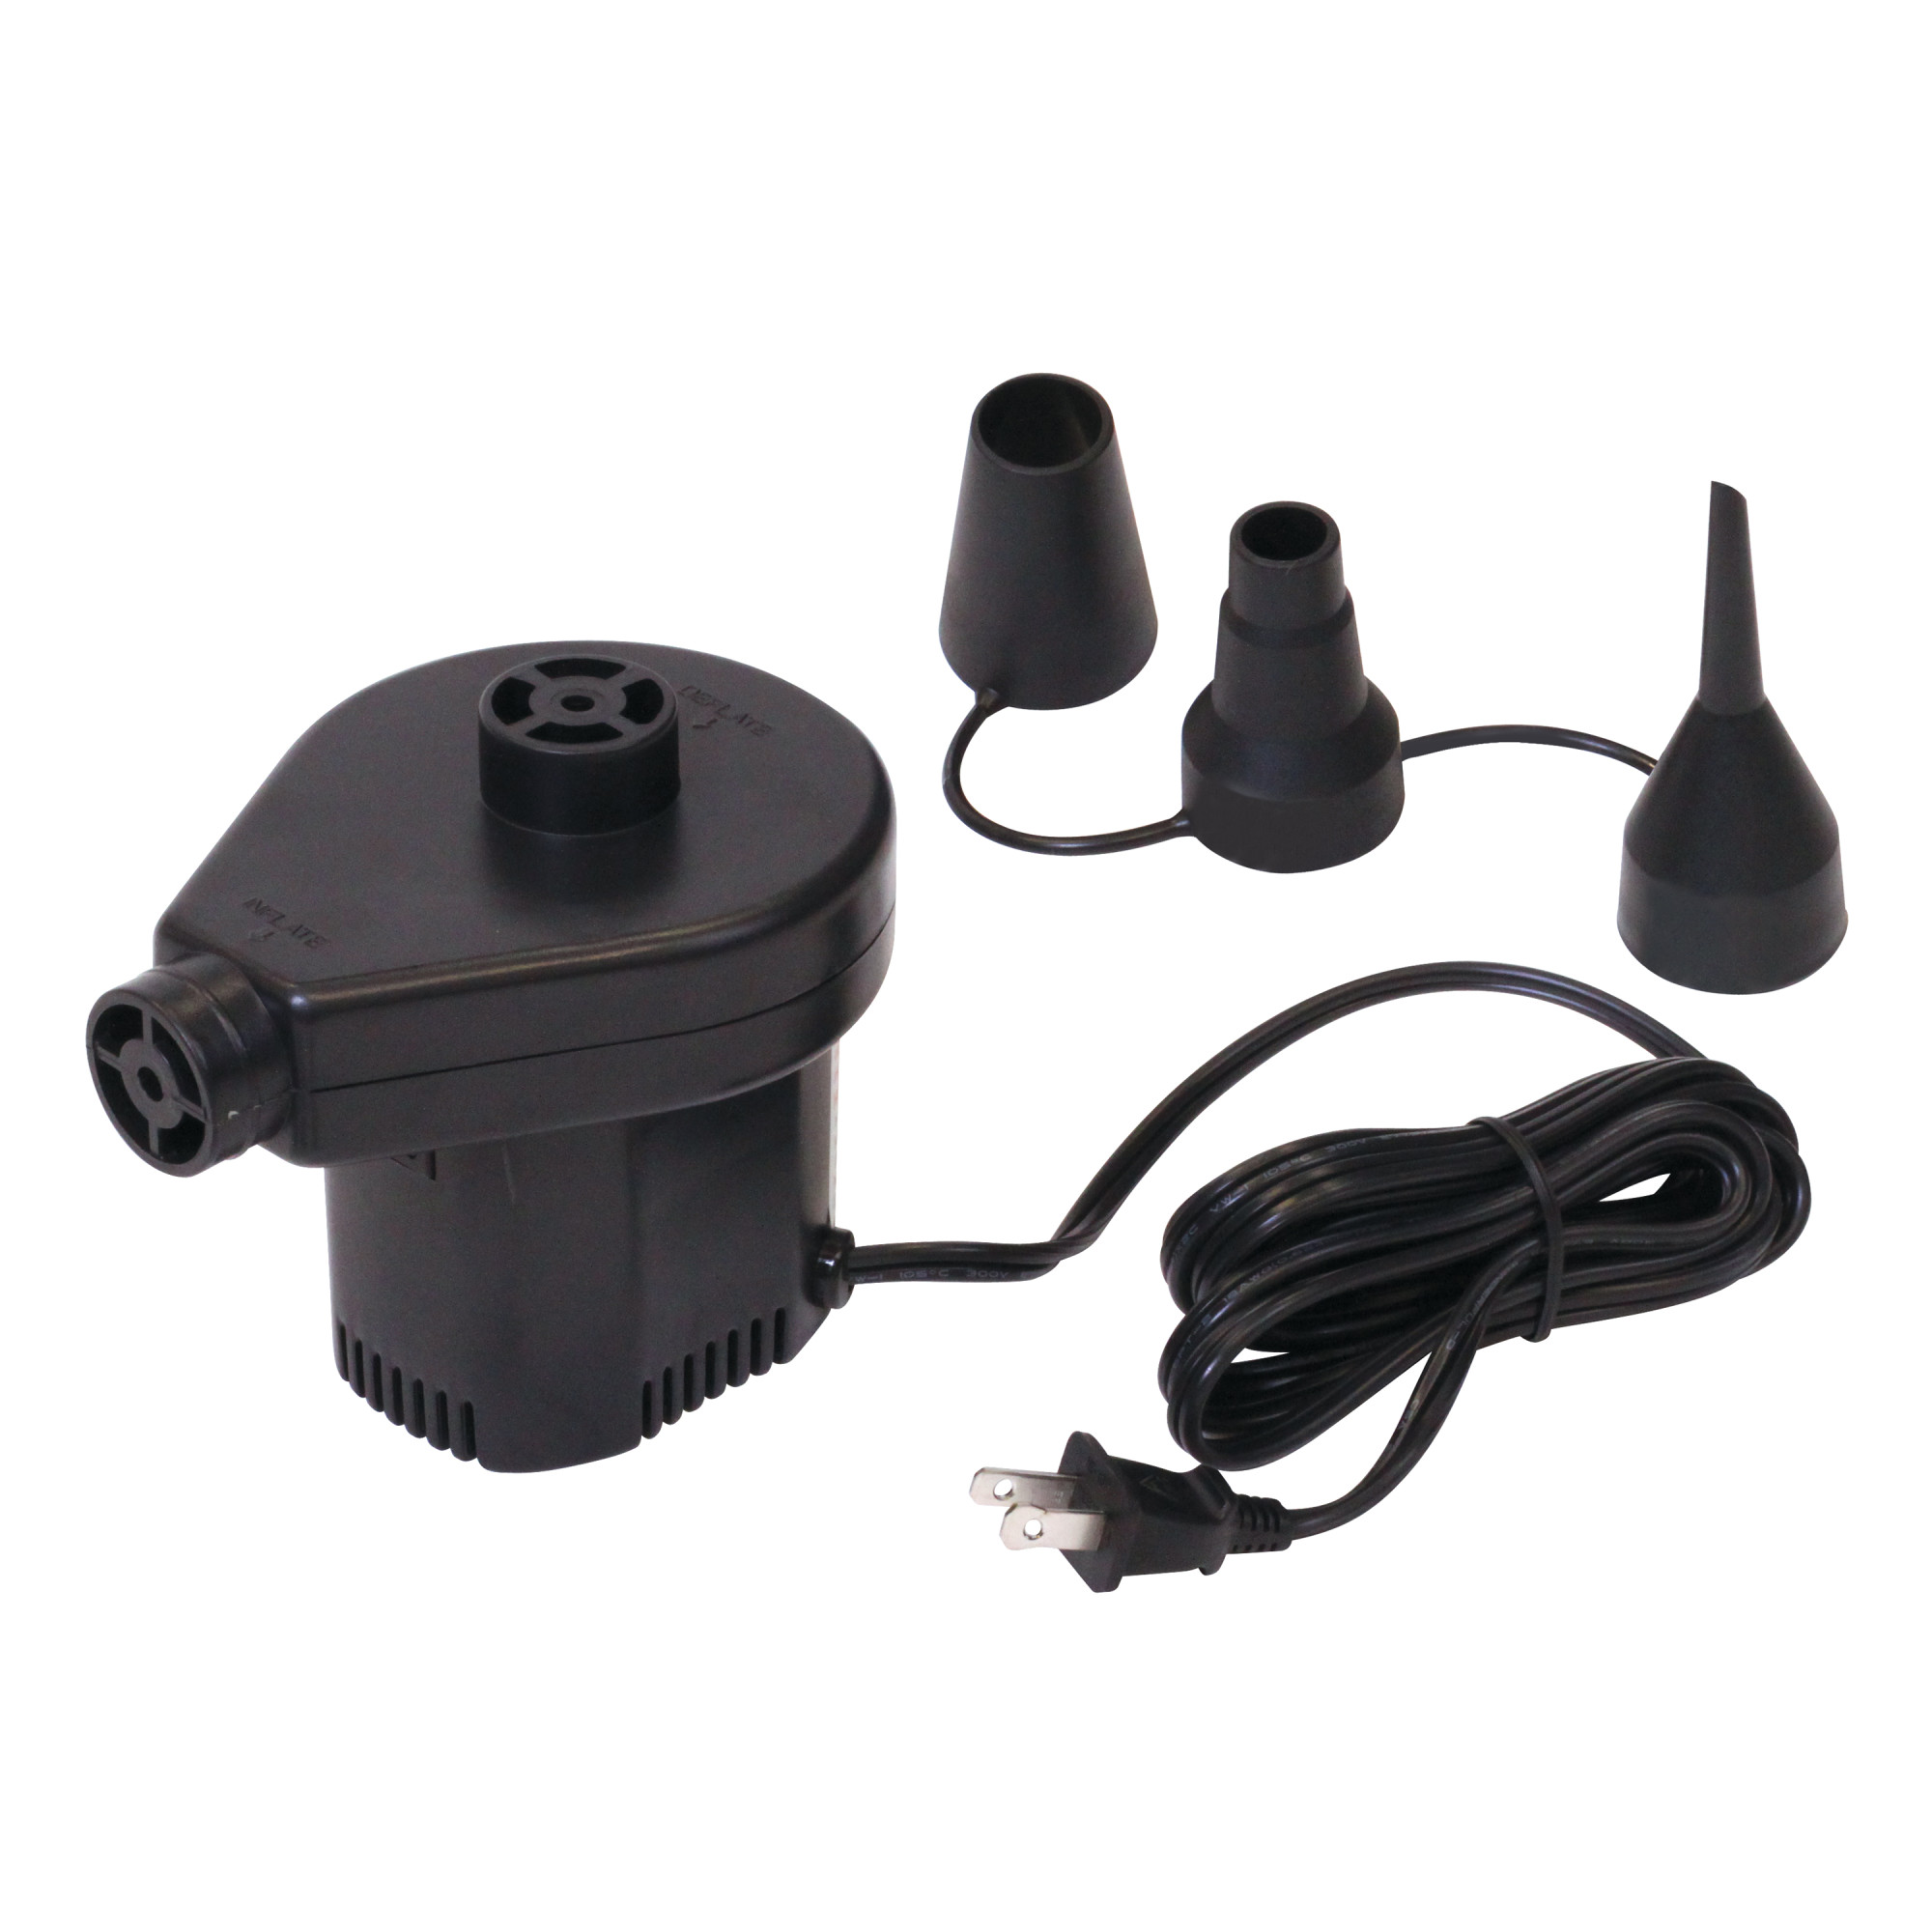 Stansport Electric Air Pump - 120 Volt AC - 1 Count - image 1 of 12